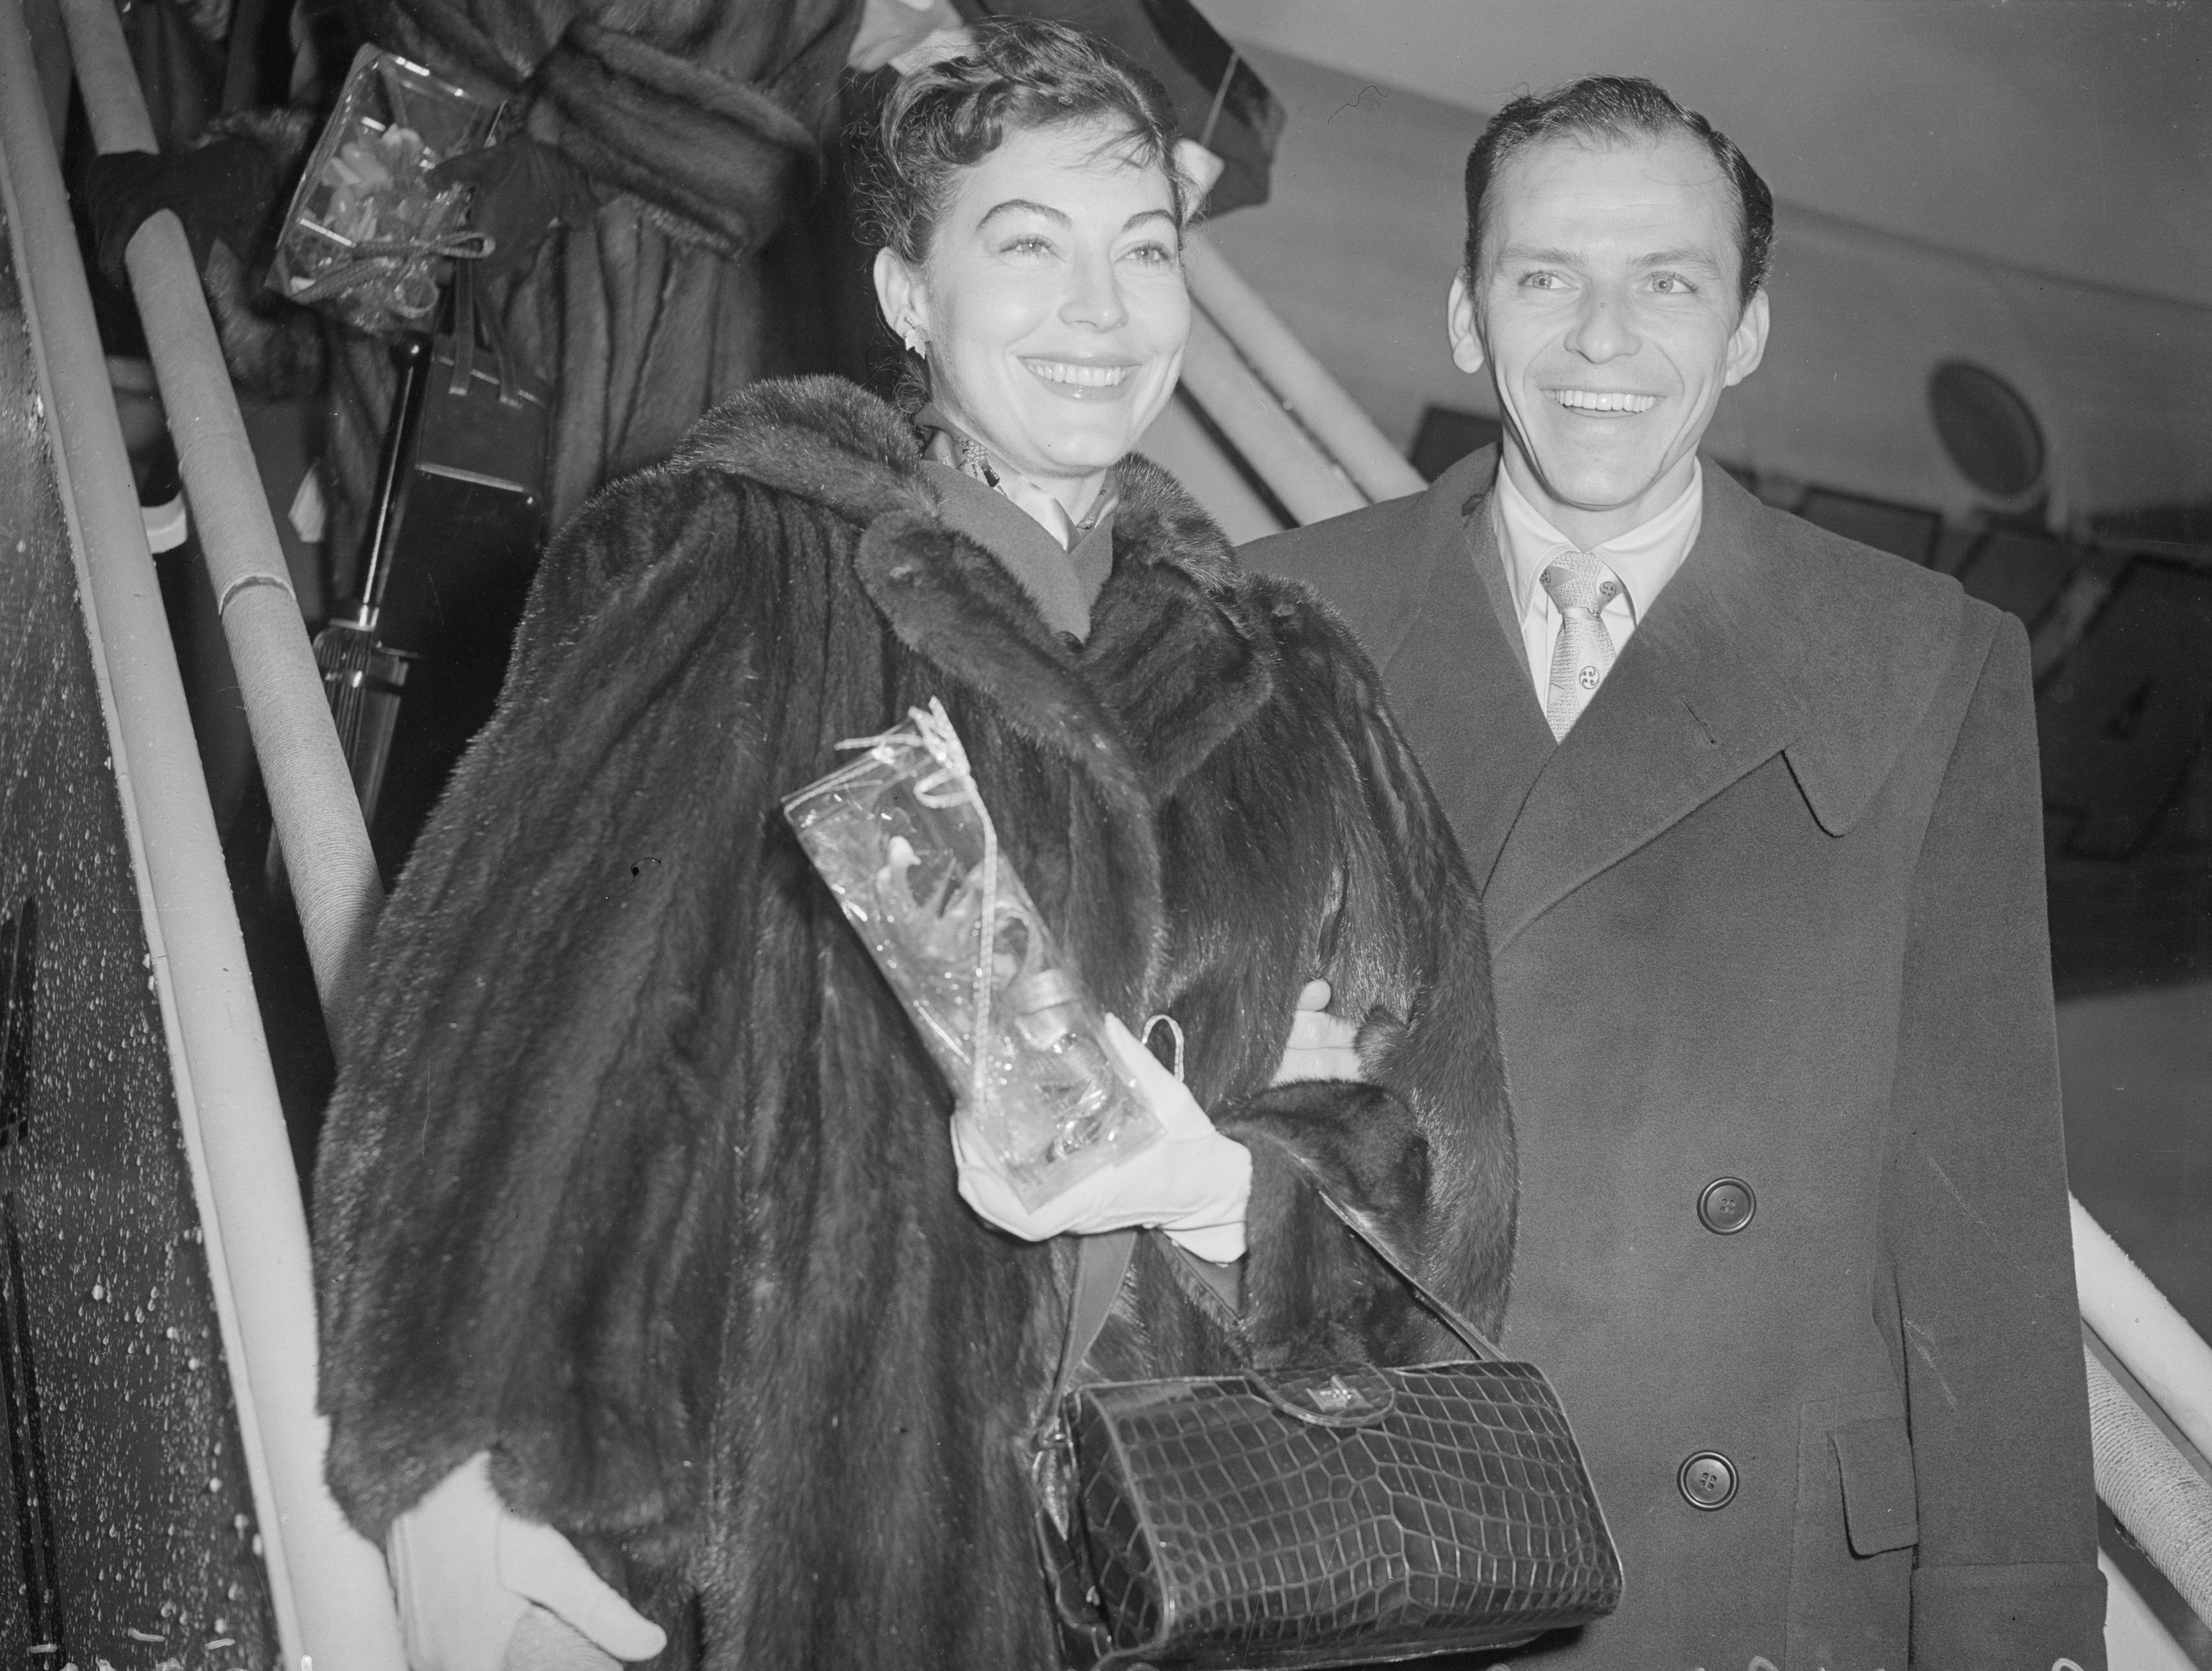 Ava Gardner wears a fur coat and Frank Sinatra wears a coat and tie. They descend the steps from an airplane.